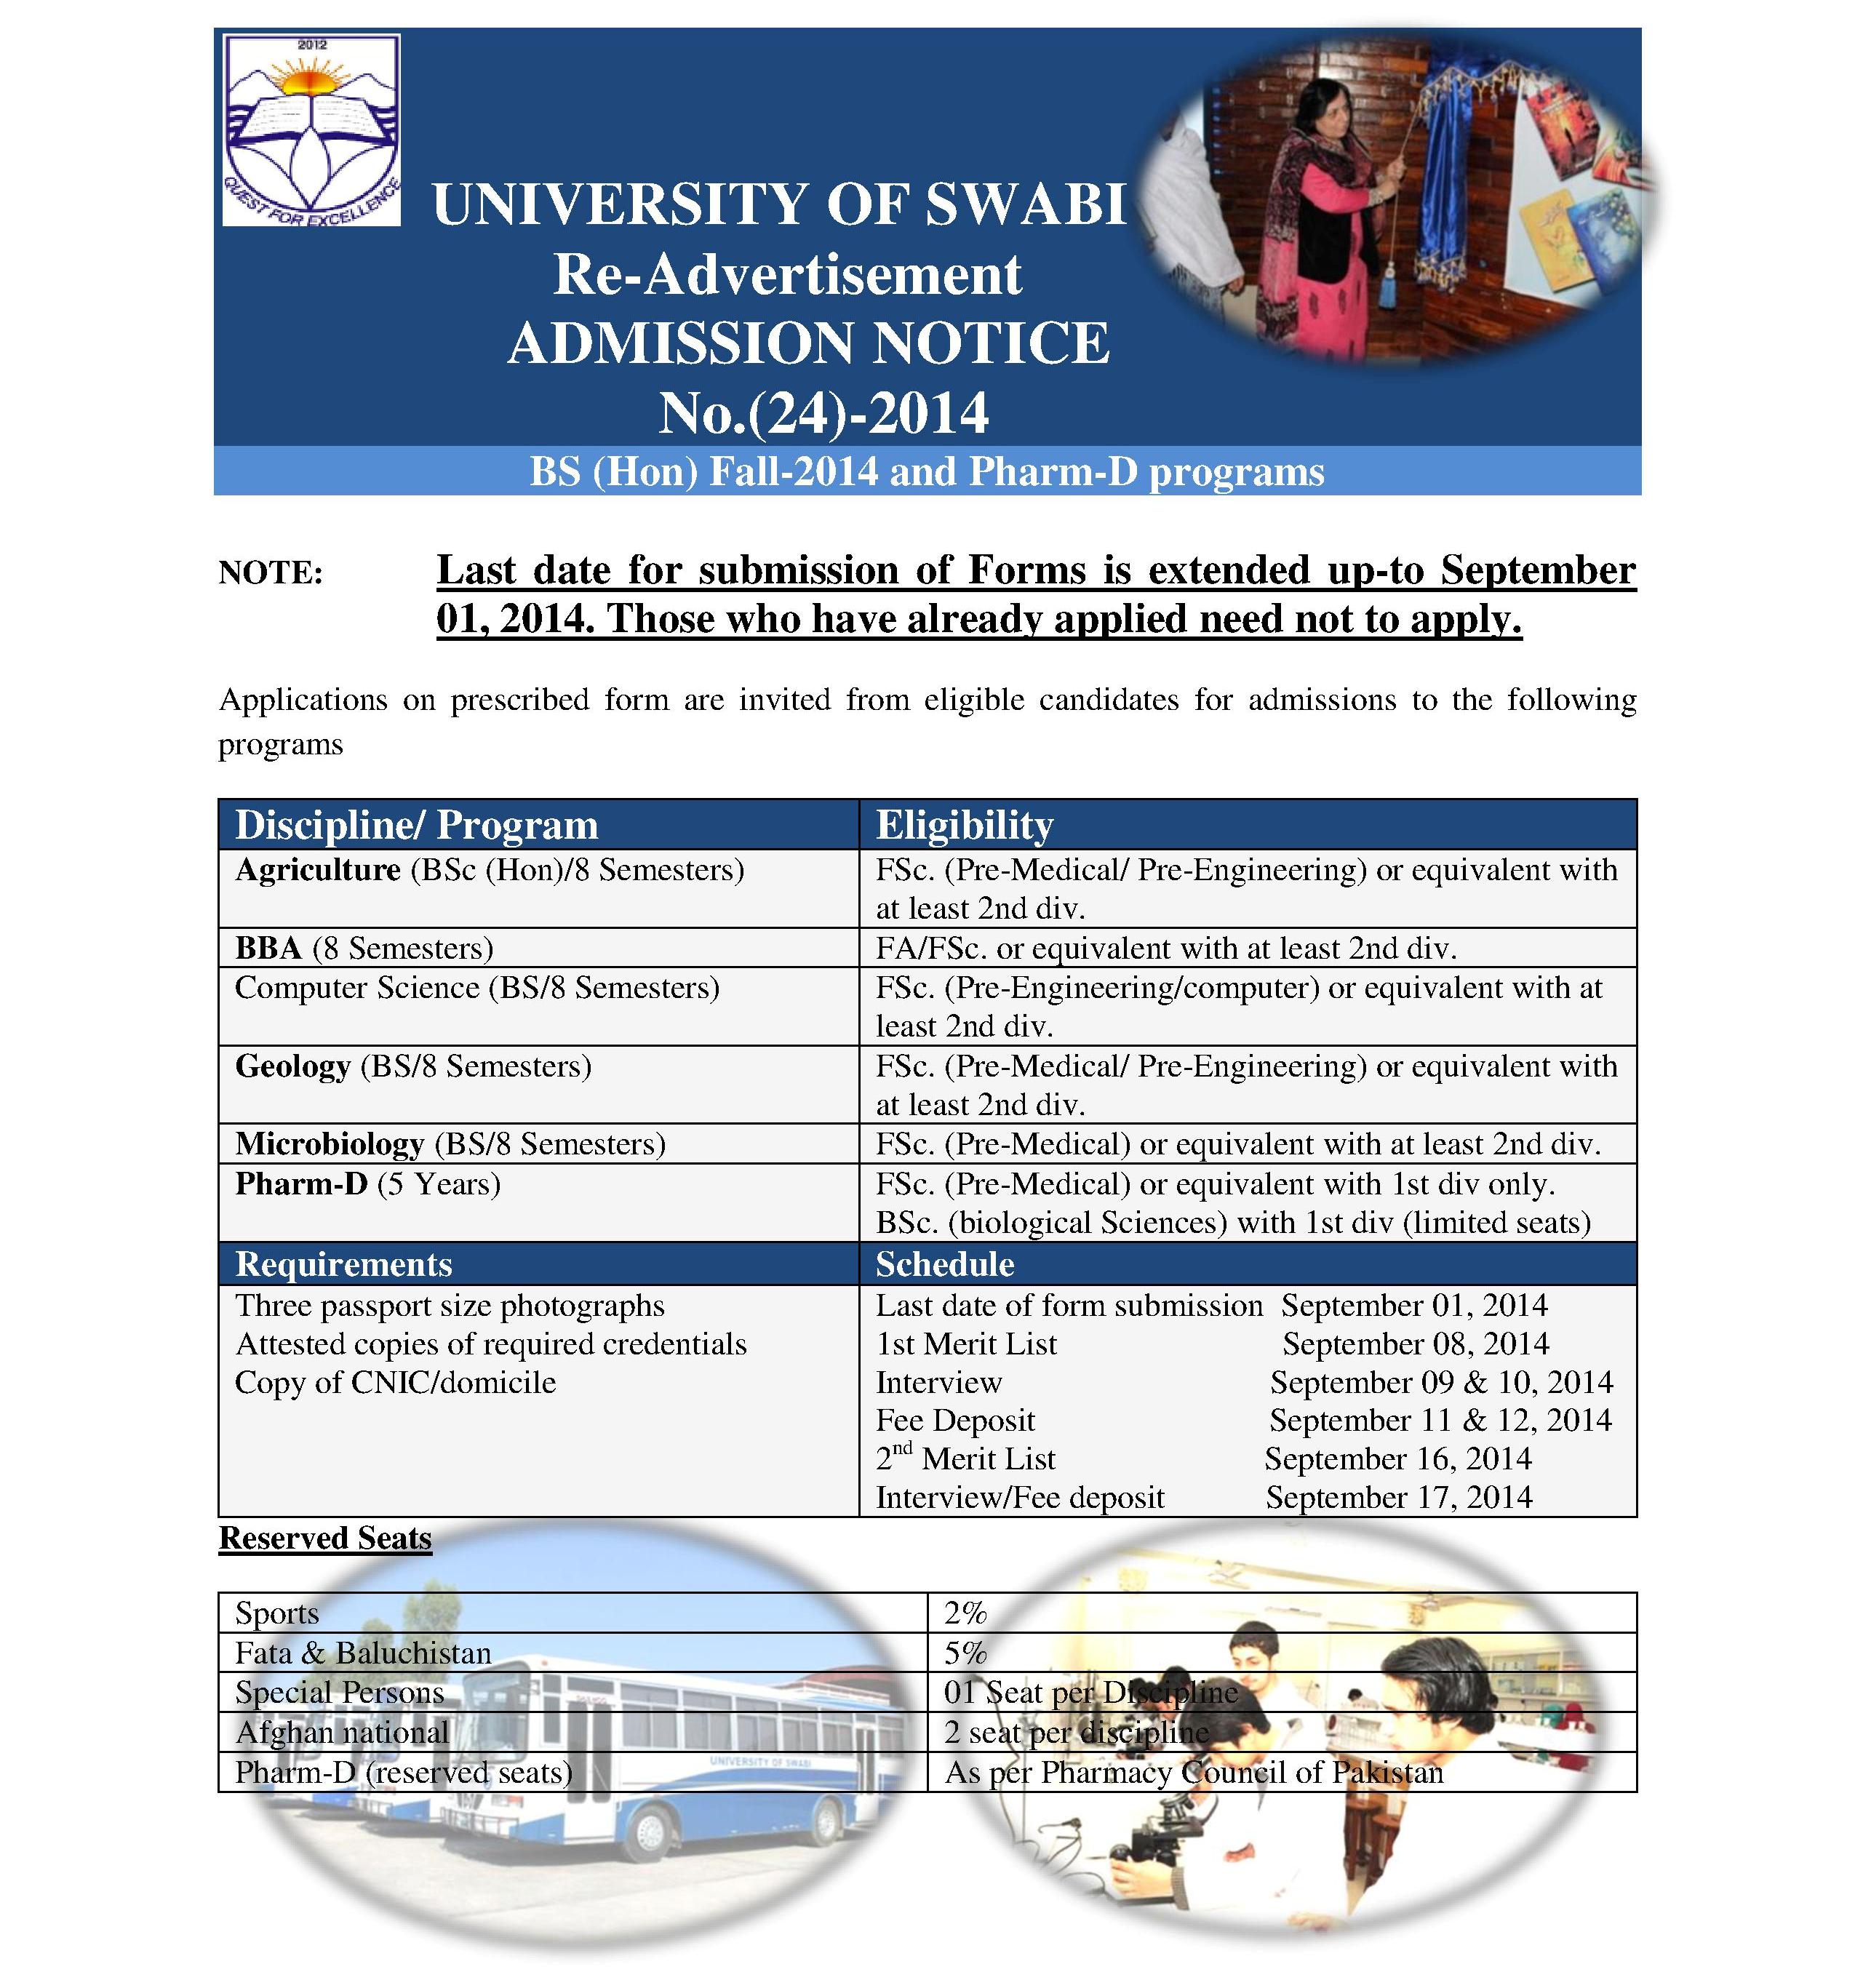 ADMISSION NOTICE BS (Hon) Fall-2014 and Pharm-D programs